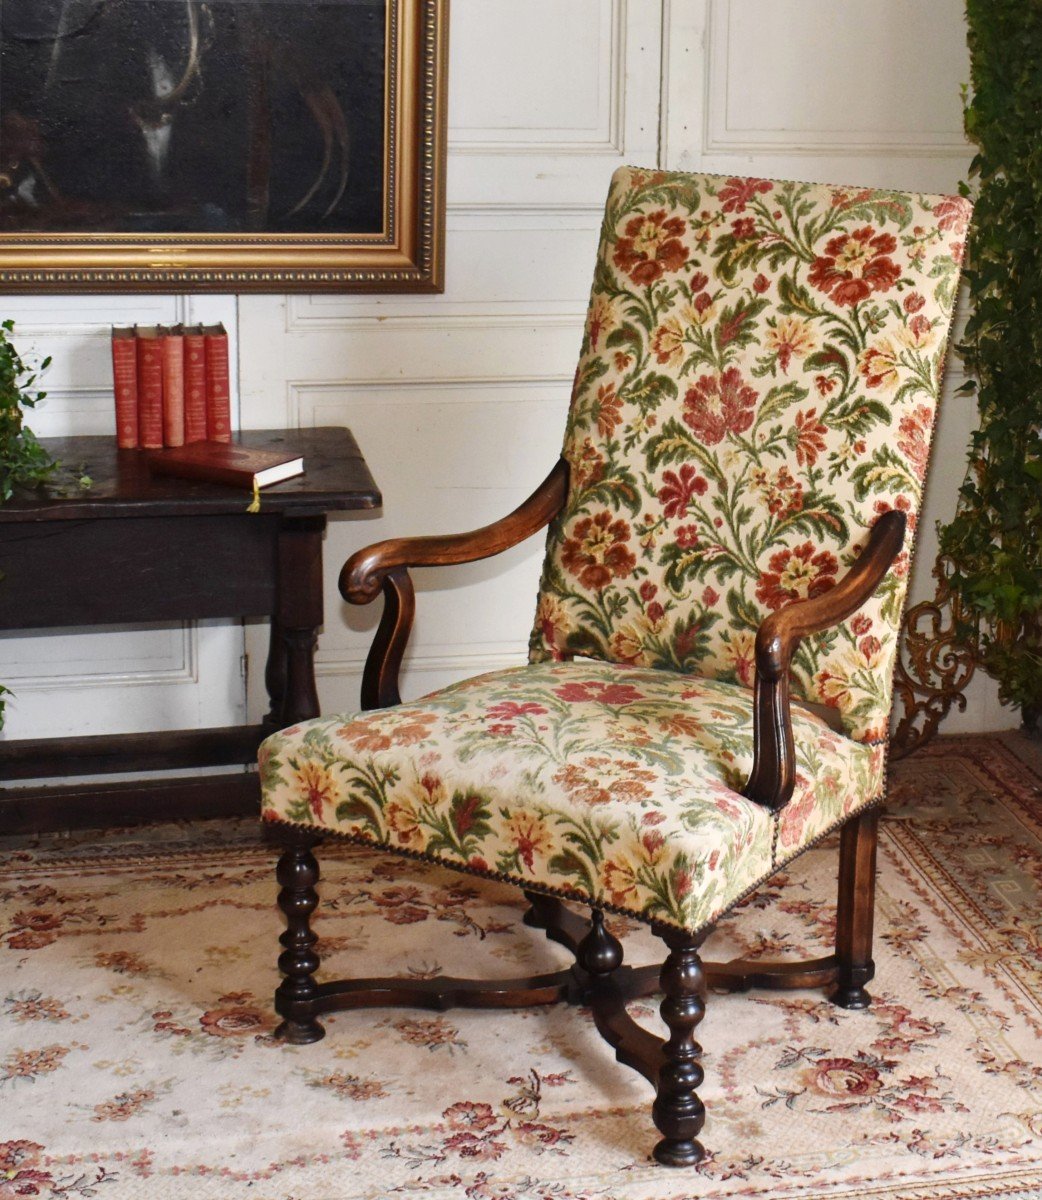 Louis XIV Armchair, High Backrest, Early 18th Century.